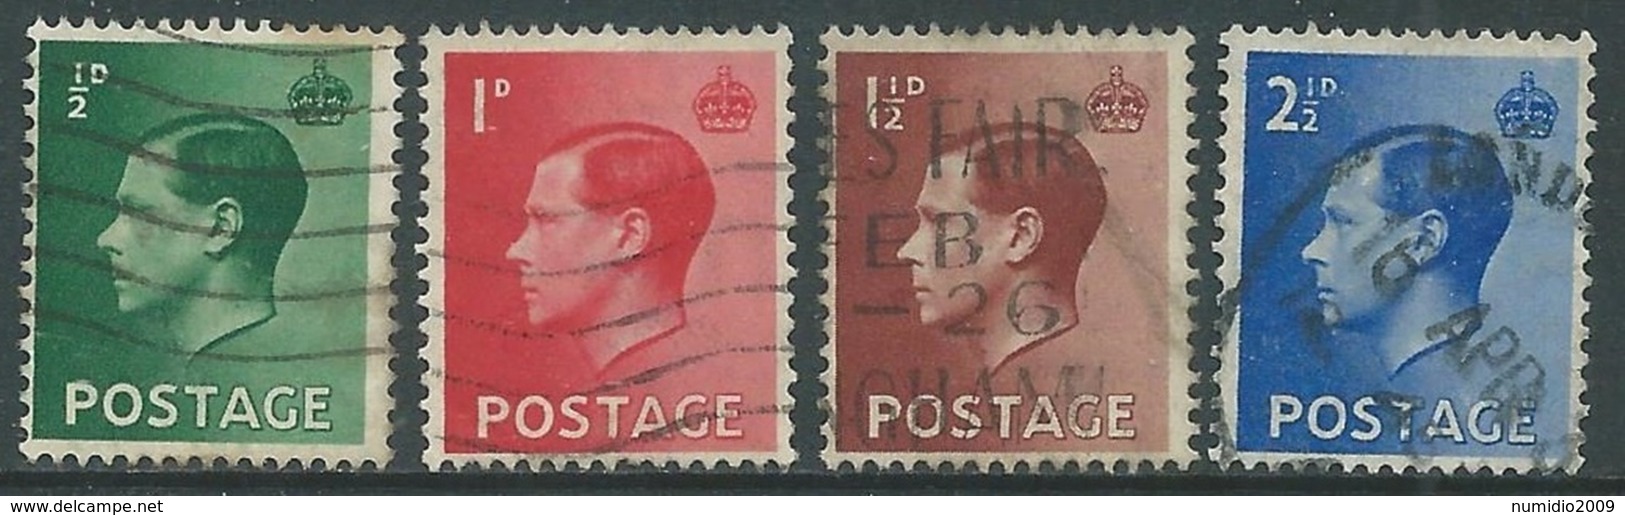 1936 GREAT BRITAIN USED SG 457/60 SET OF 4 - F23-2 - Used Stamps